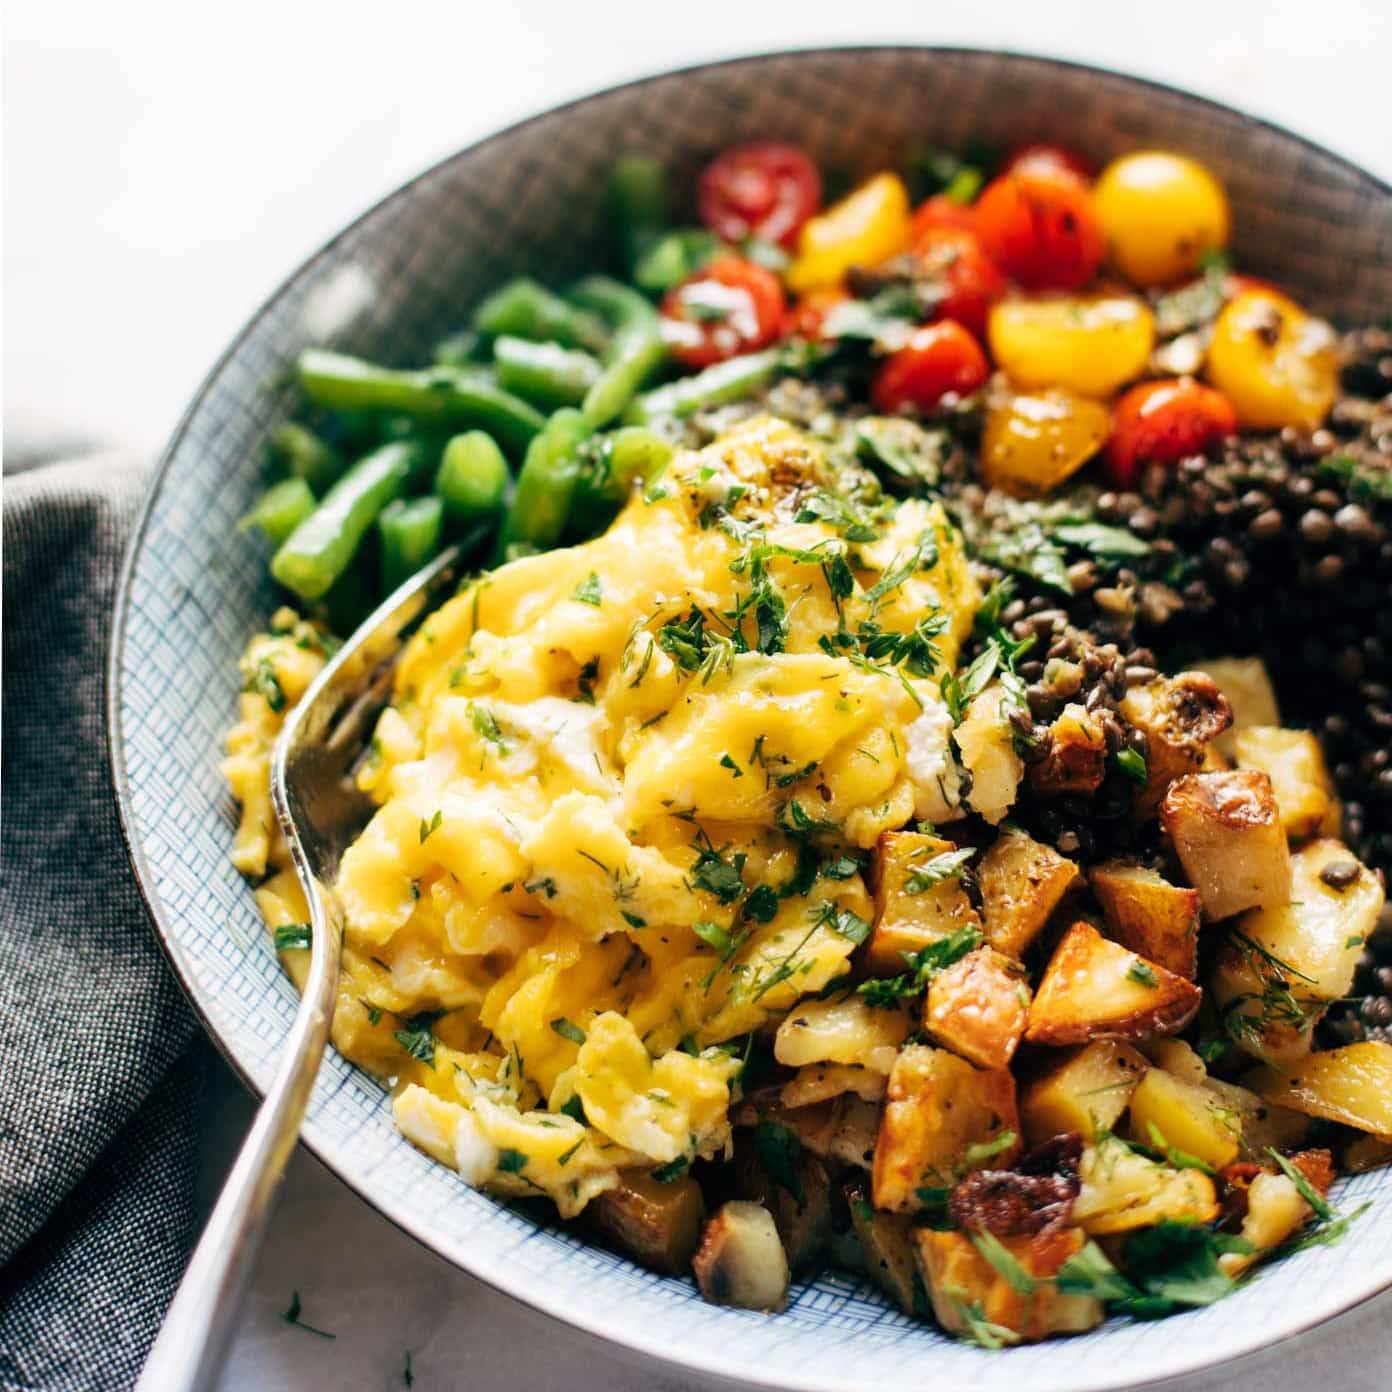 Lentil Bowl with scrambled eggs, potatoes, green beans, and tomatoes.